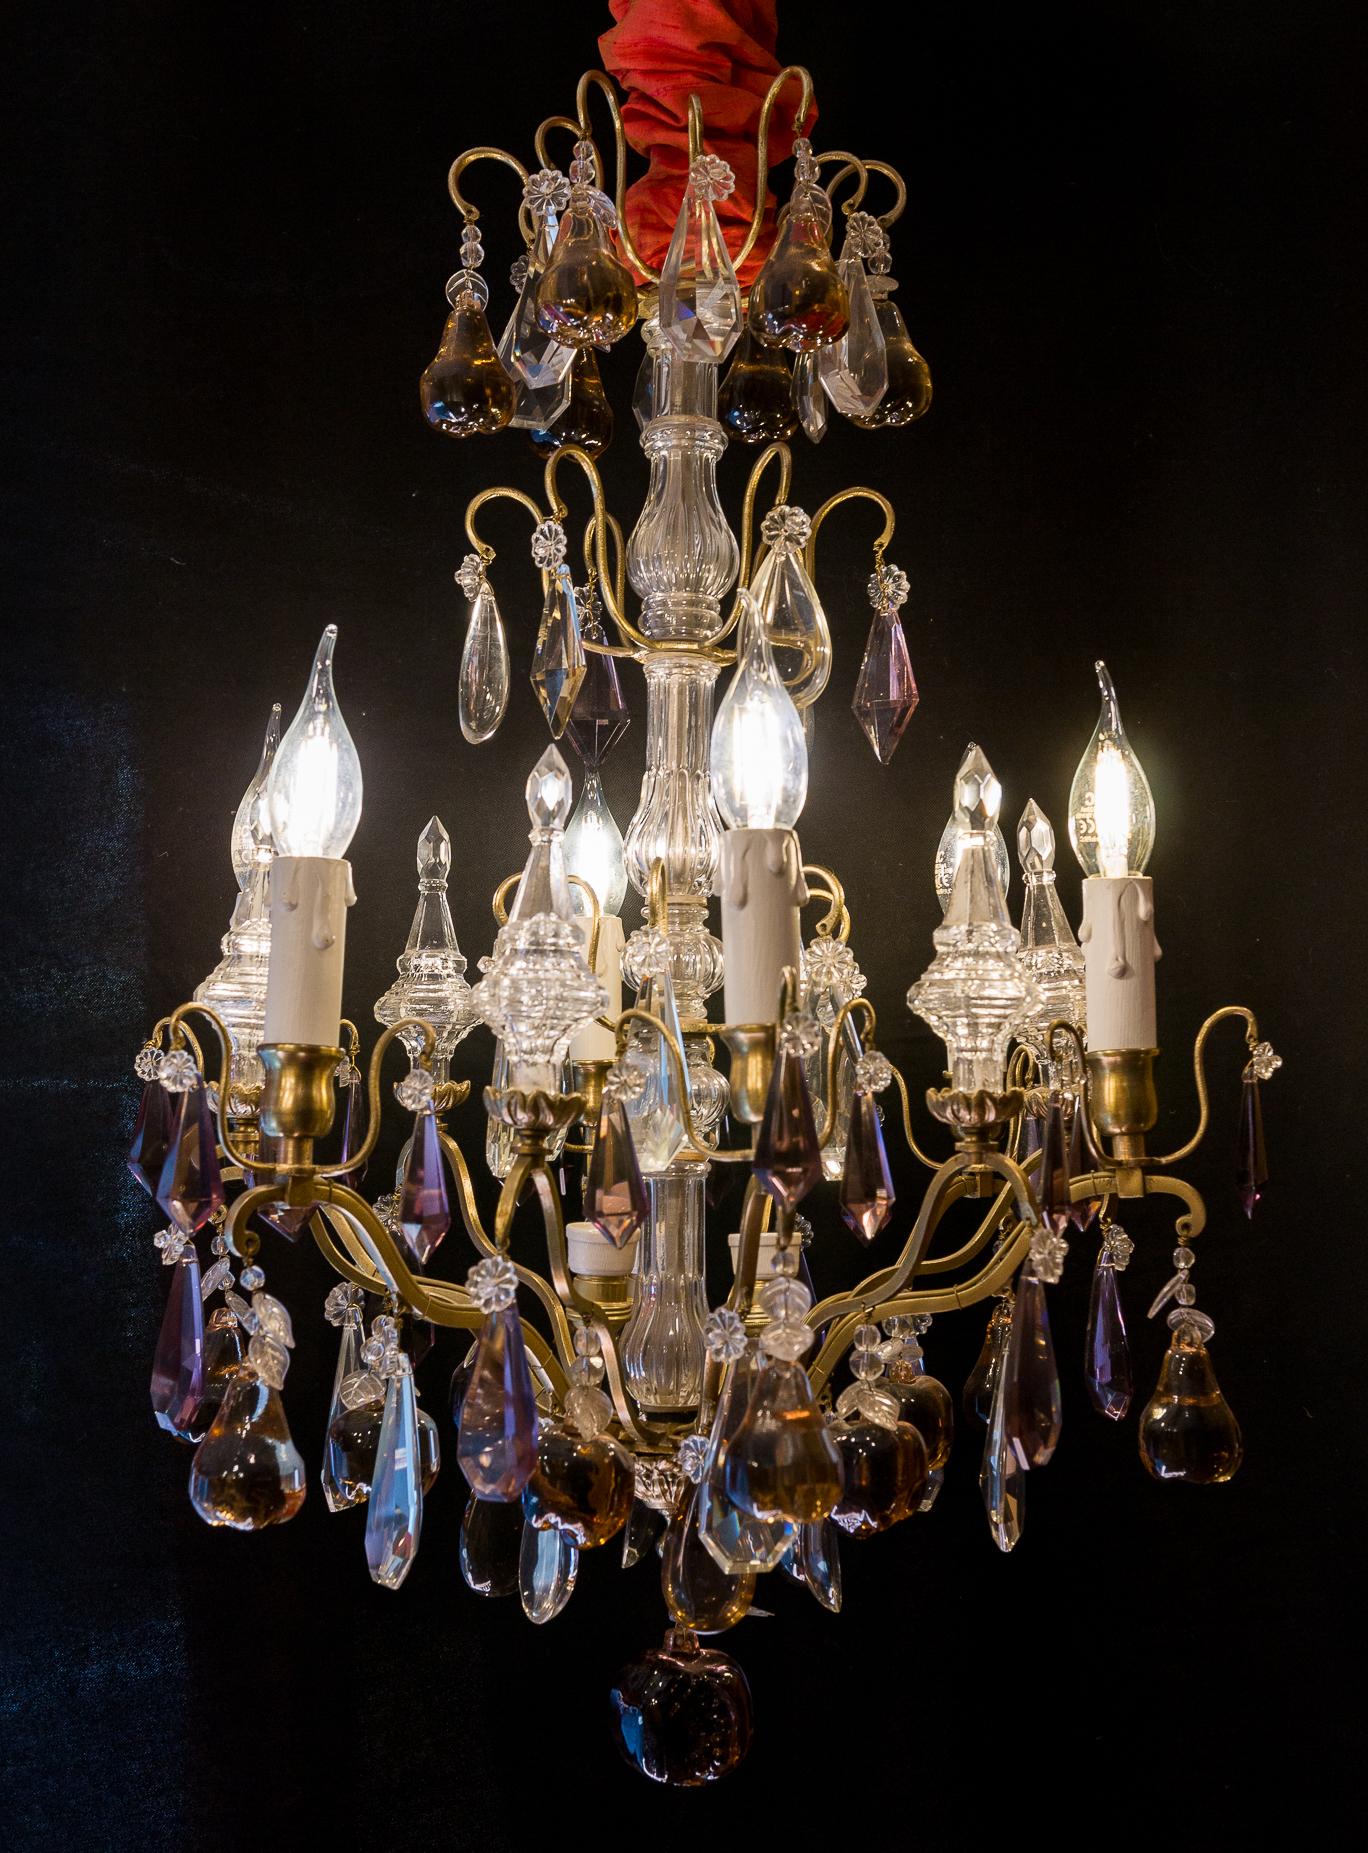 French Louis XVI Style Gilt-Bronze & Cut Crystal Small Chandelier Circa 1920

A lovely gilt-bronze and cut crystal small chandelier in the classic French Louis XVI style. 
Our chandelier is composed of six perimeter arm-lights. 
Excellent